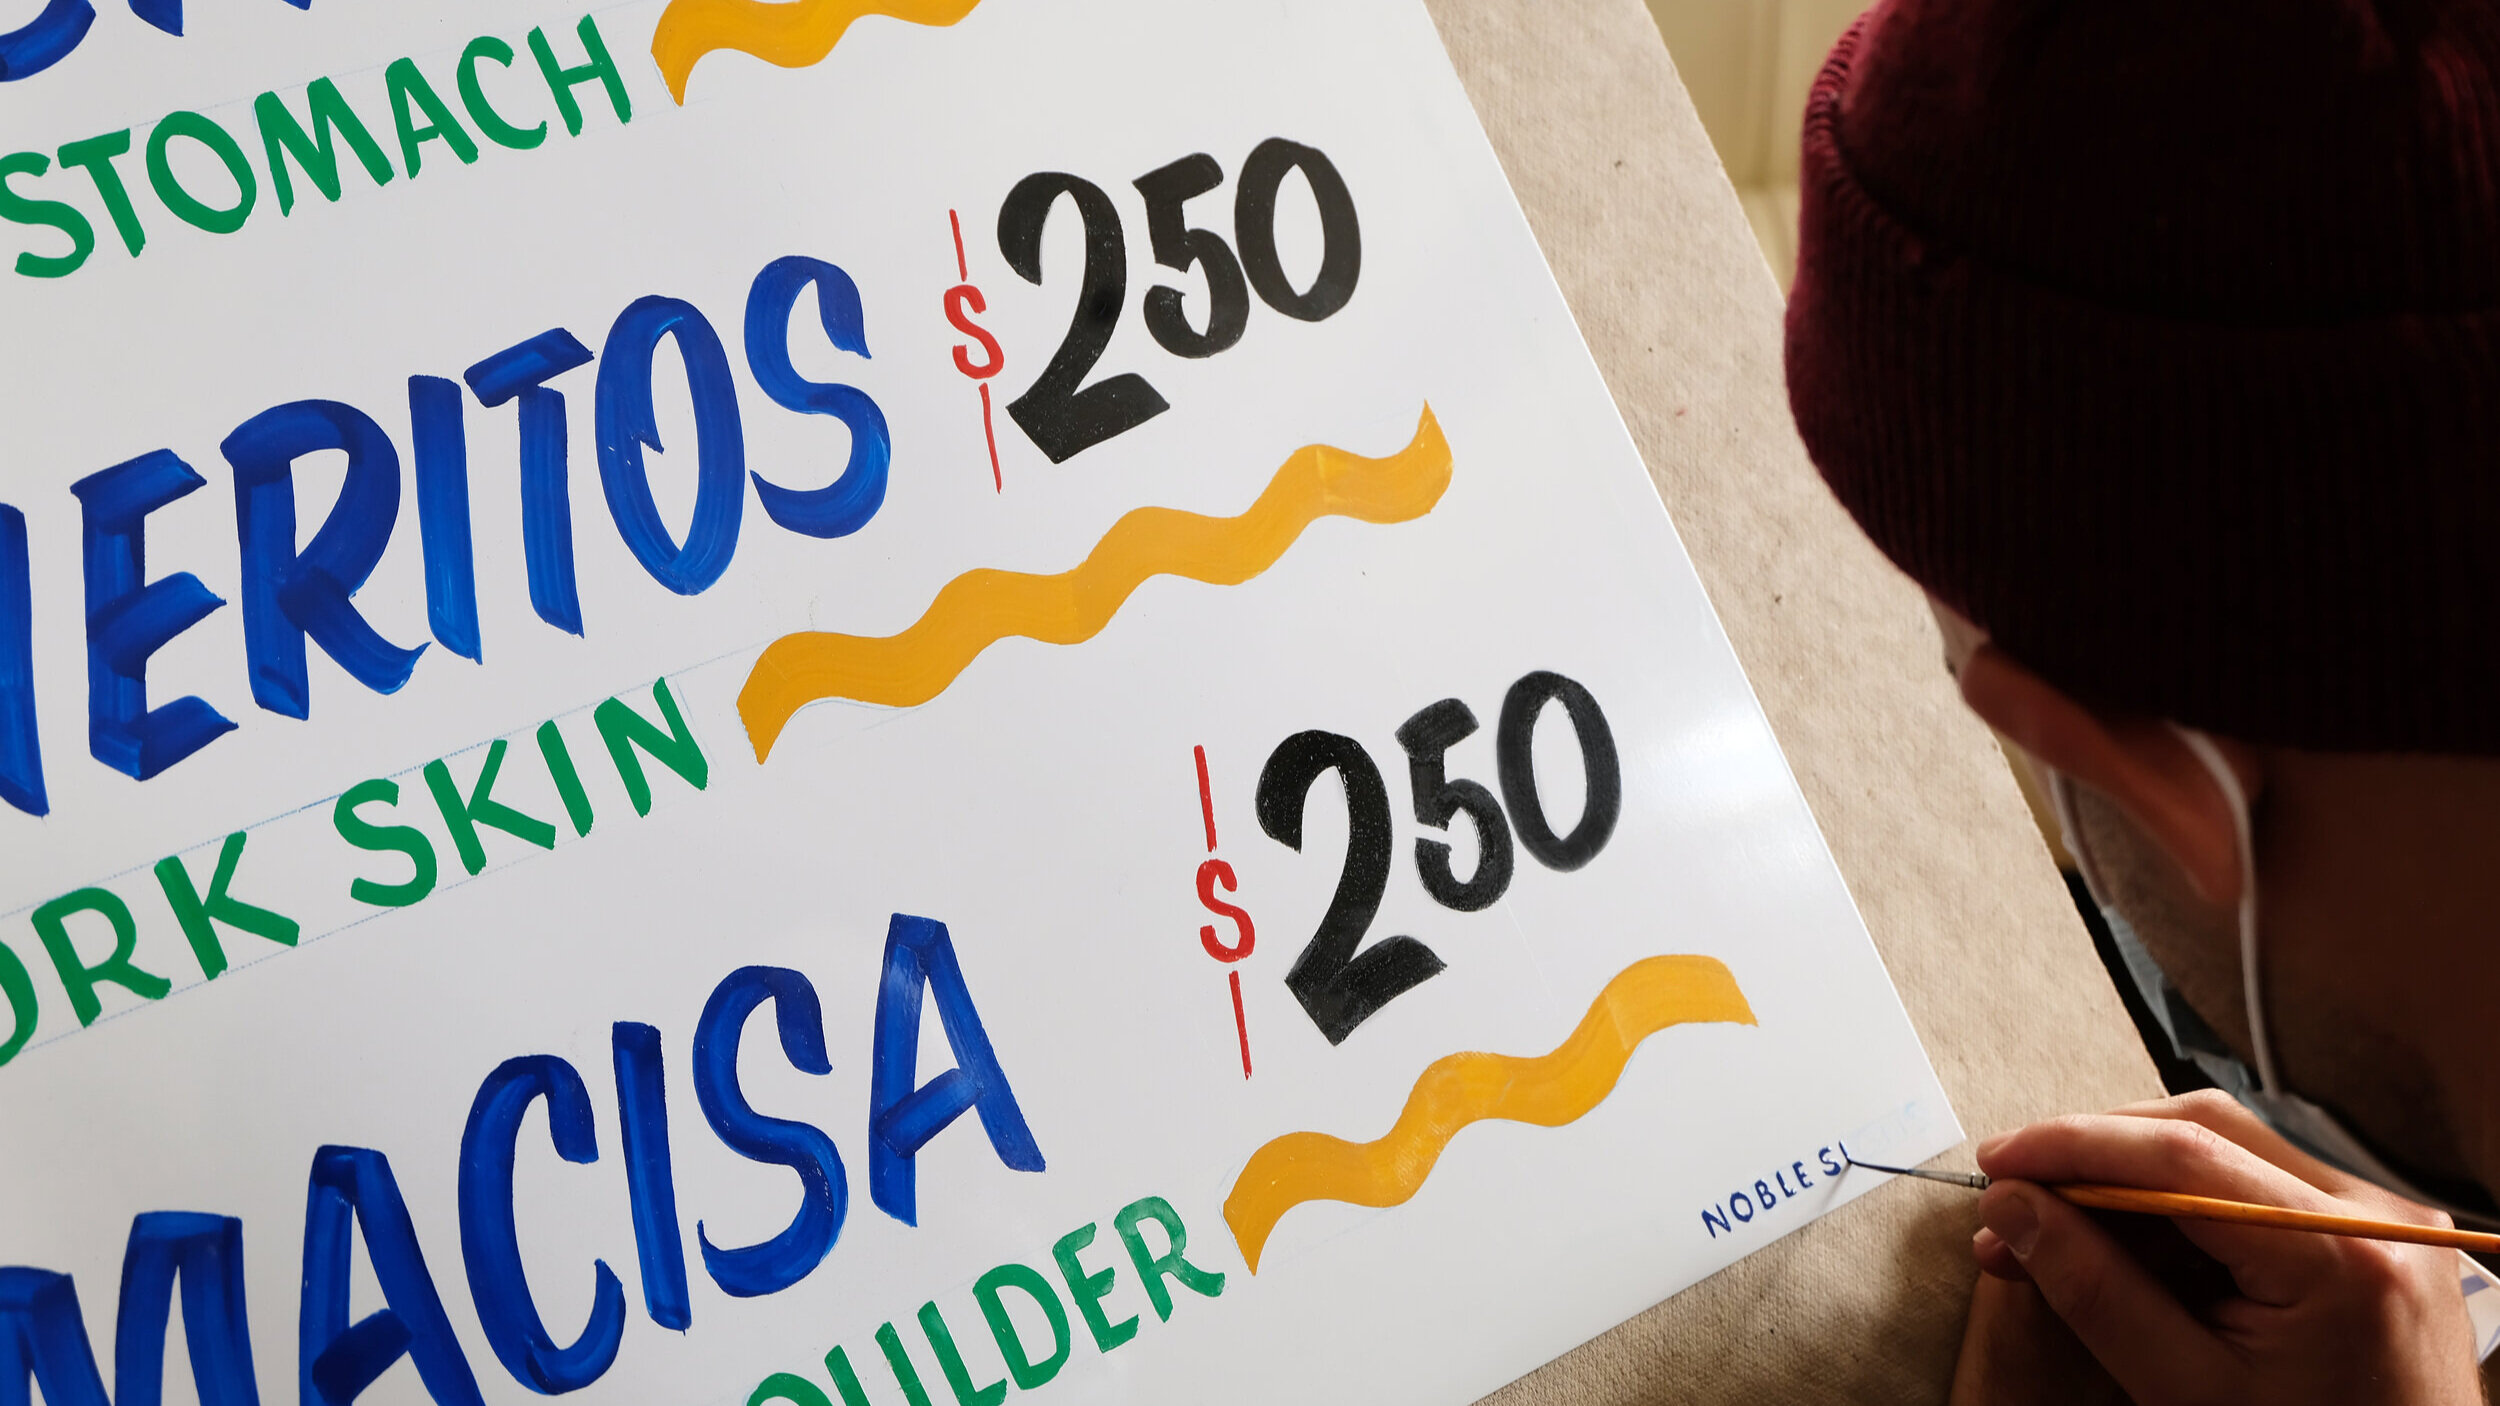  A close-uo of a restaurant menu being handpainted on paper in a casual signpainter’s lettering style 